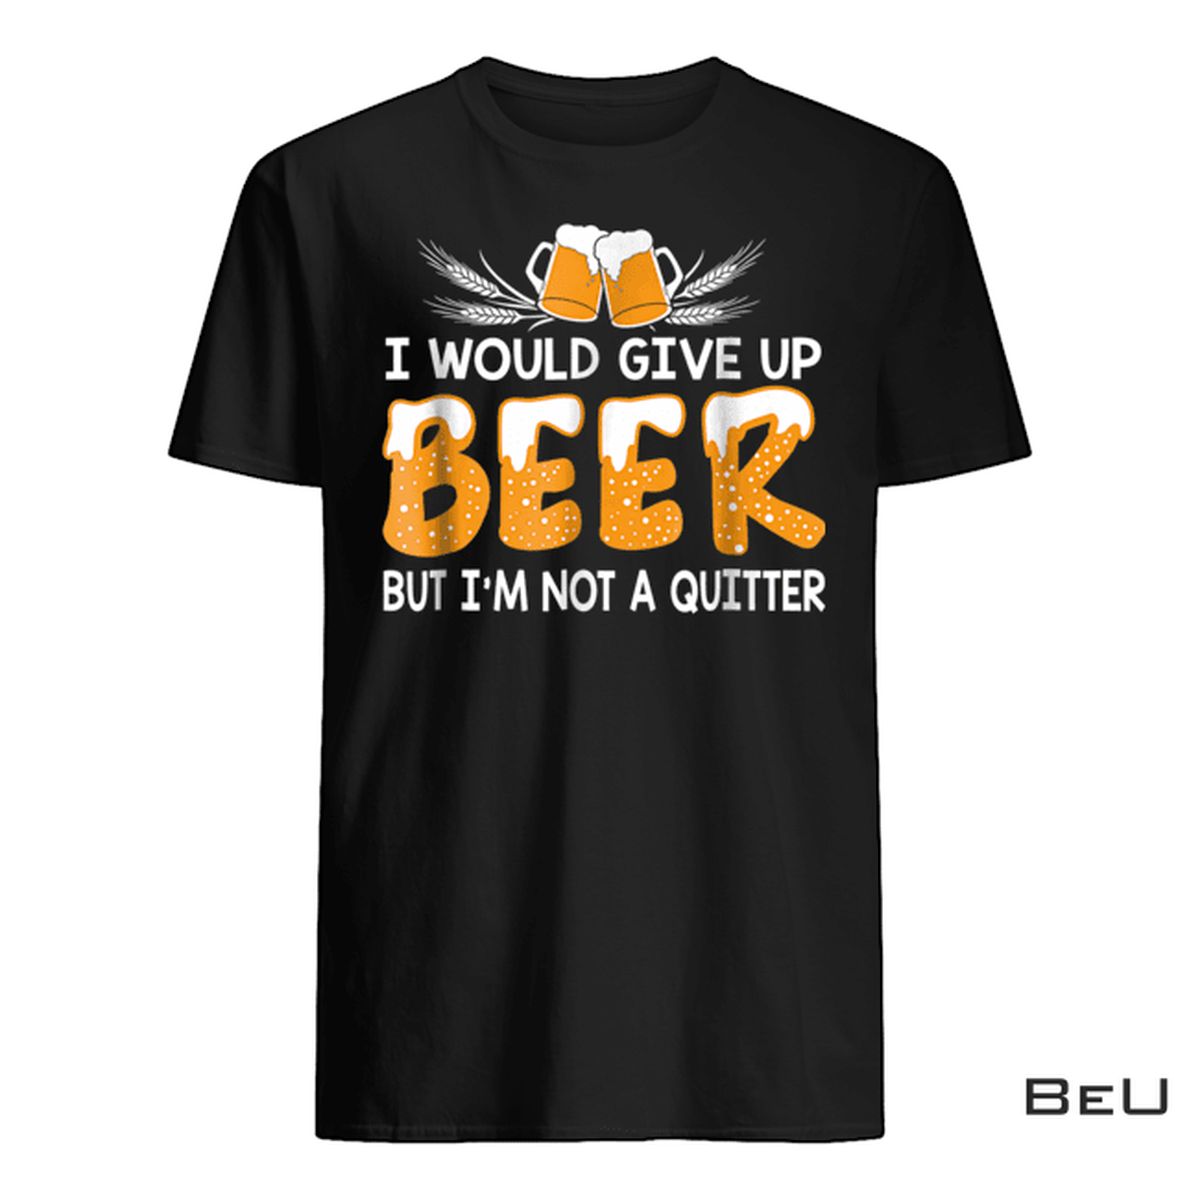 I Would Give Up Beer But I'm Not A Quitter Shirt